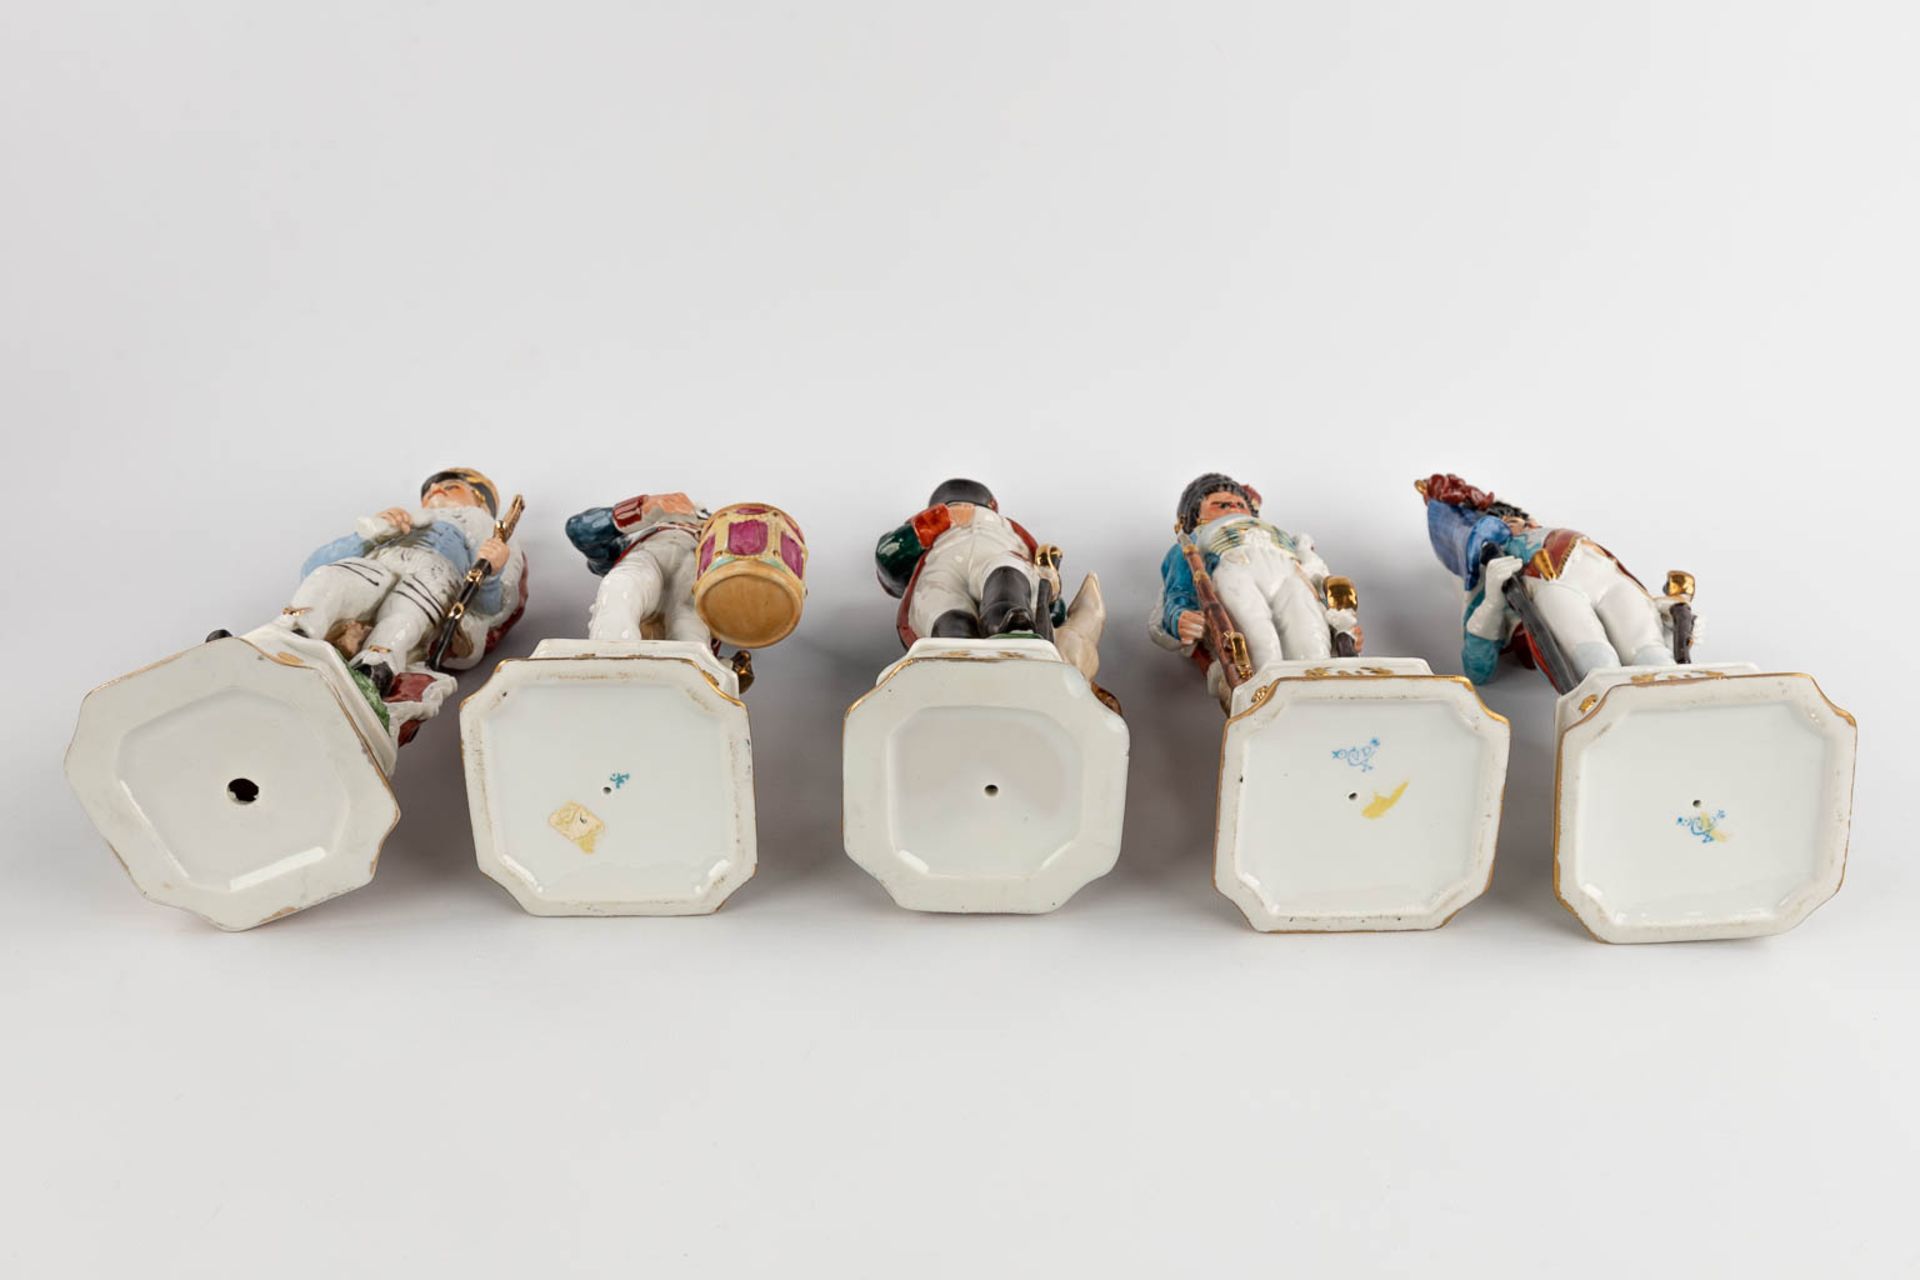 Napoleon and 9 generals, polychrome porcelain. 20th C. (H:32 cm) - Image 15 of 15